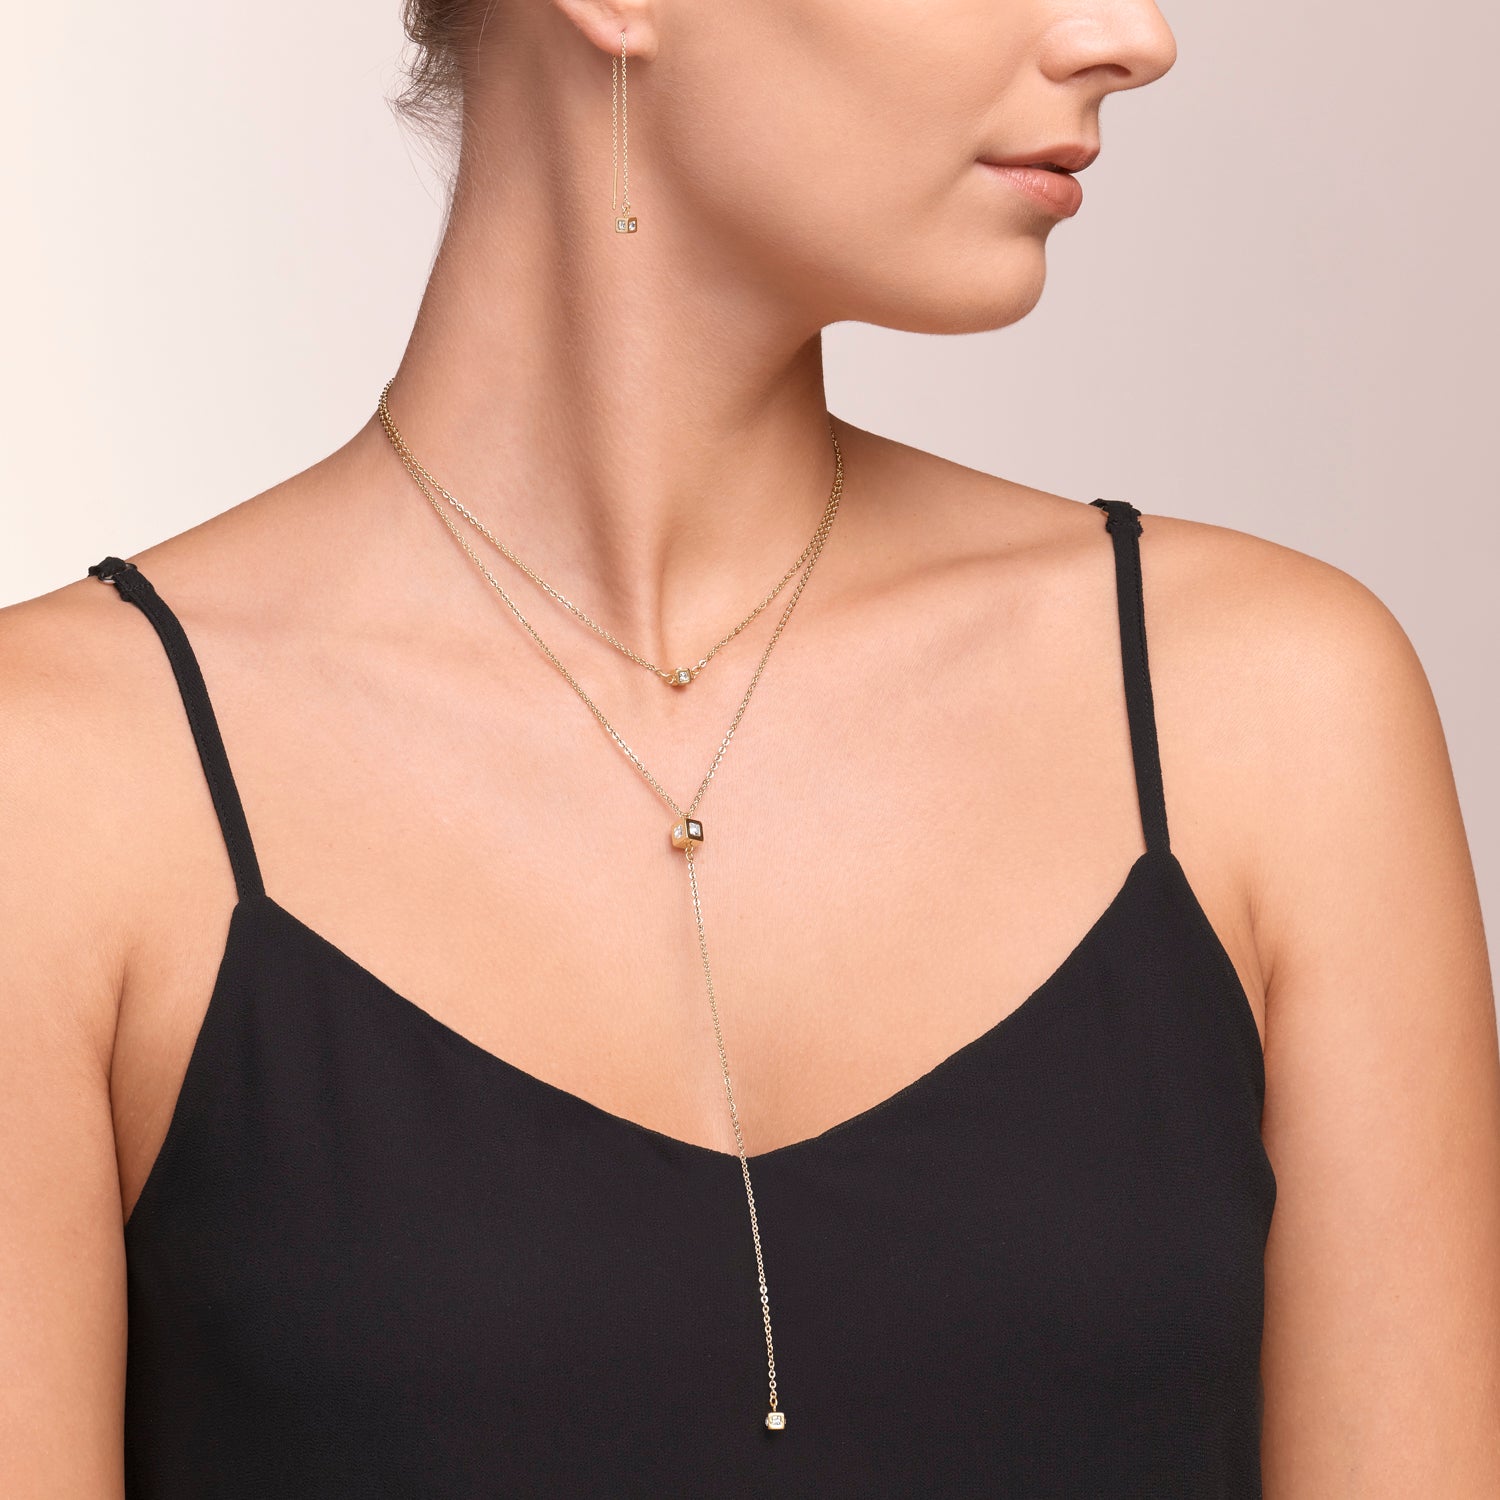 Necklace Y long Minimalist Chain stainless steel gold crystal